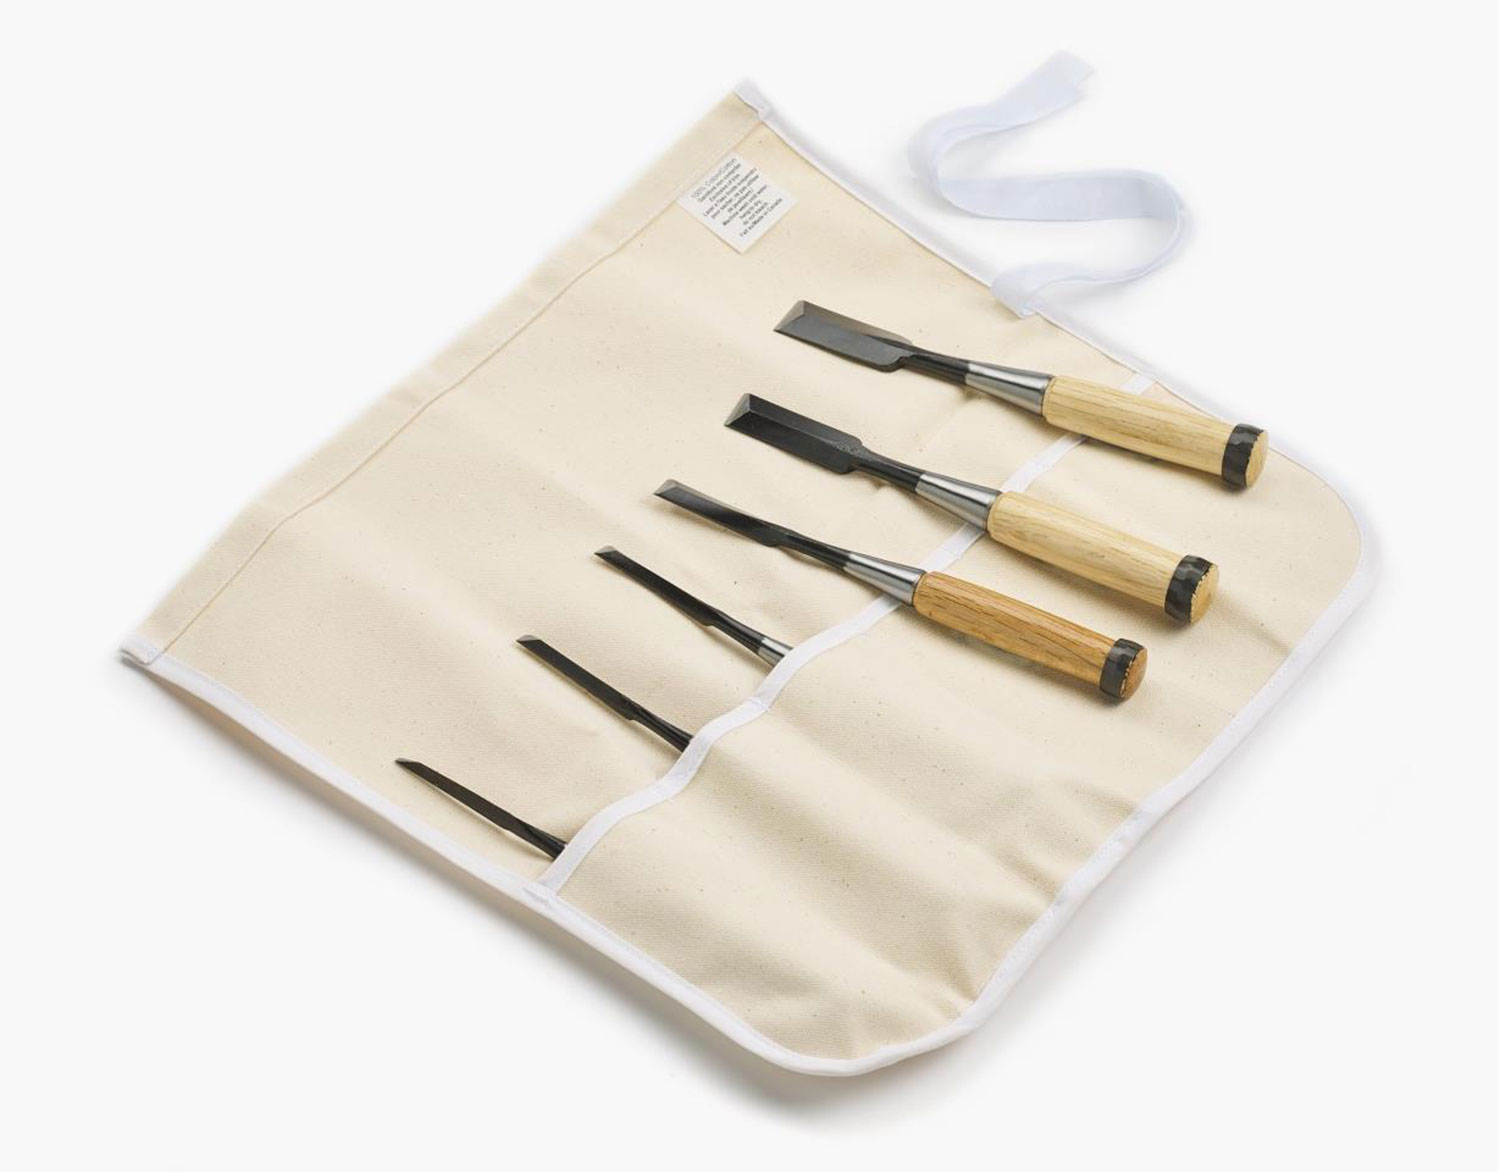 A set of Japanese chisels stored in a canvas tool roll.